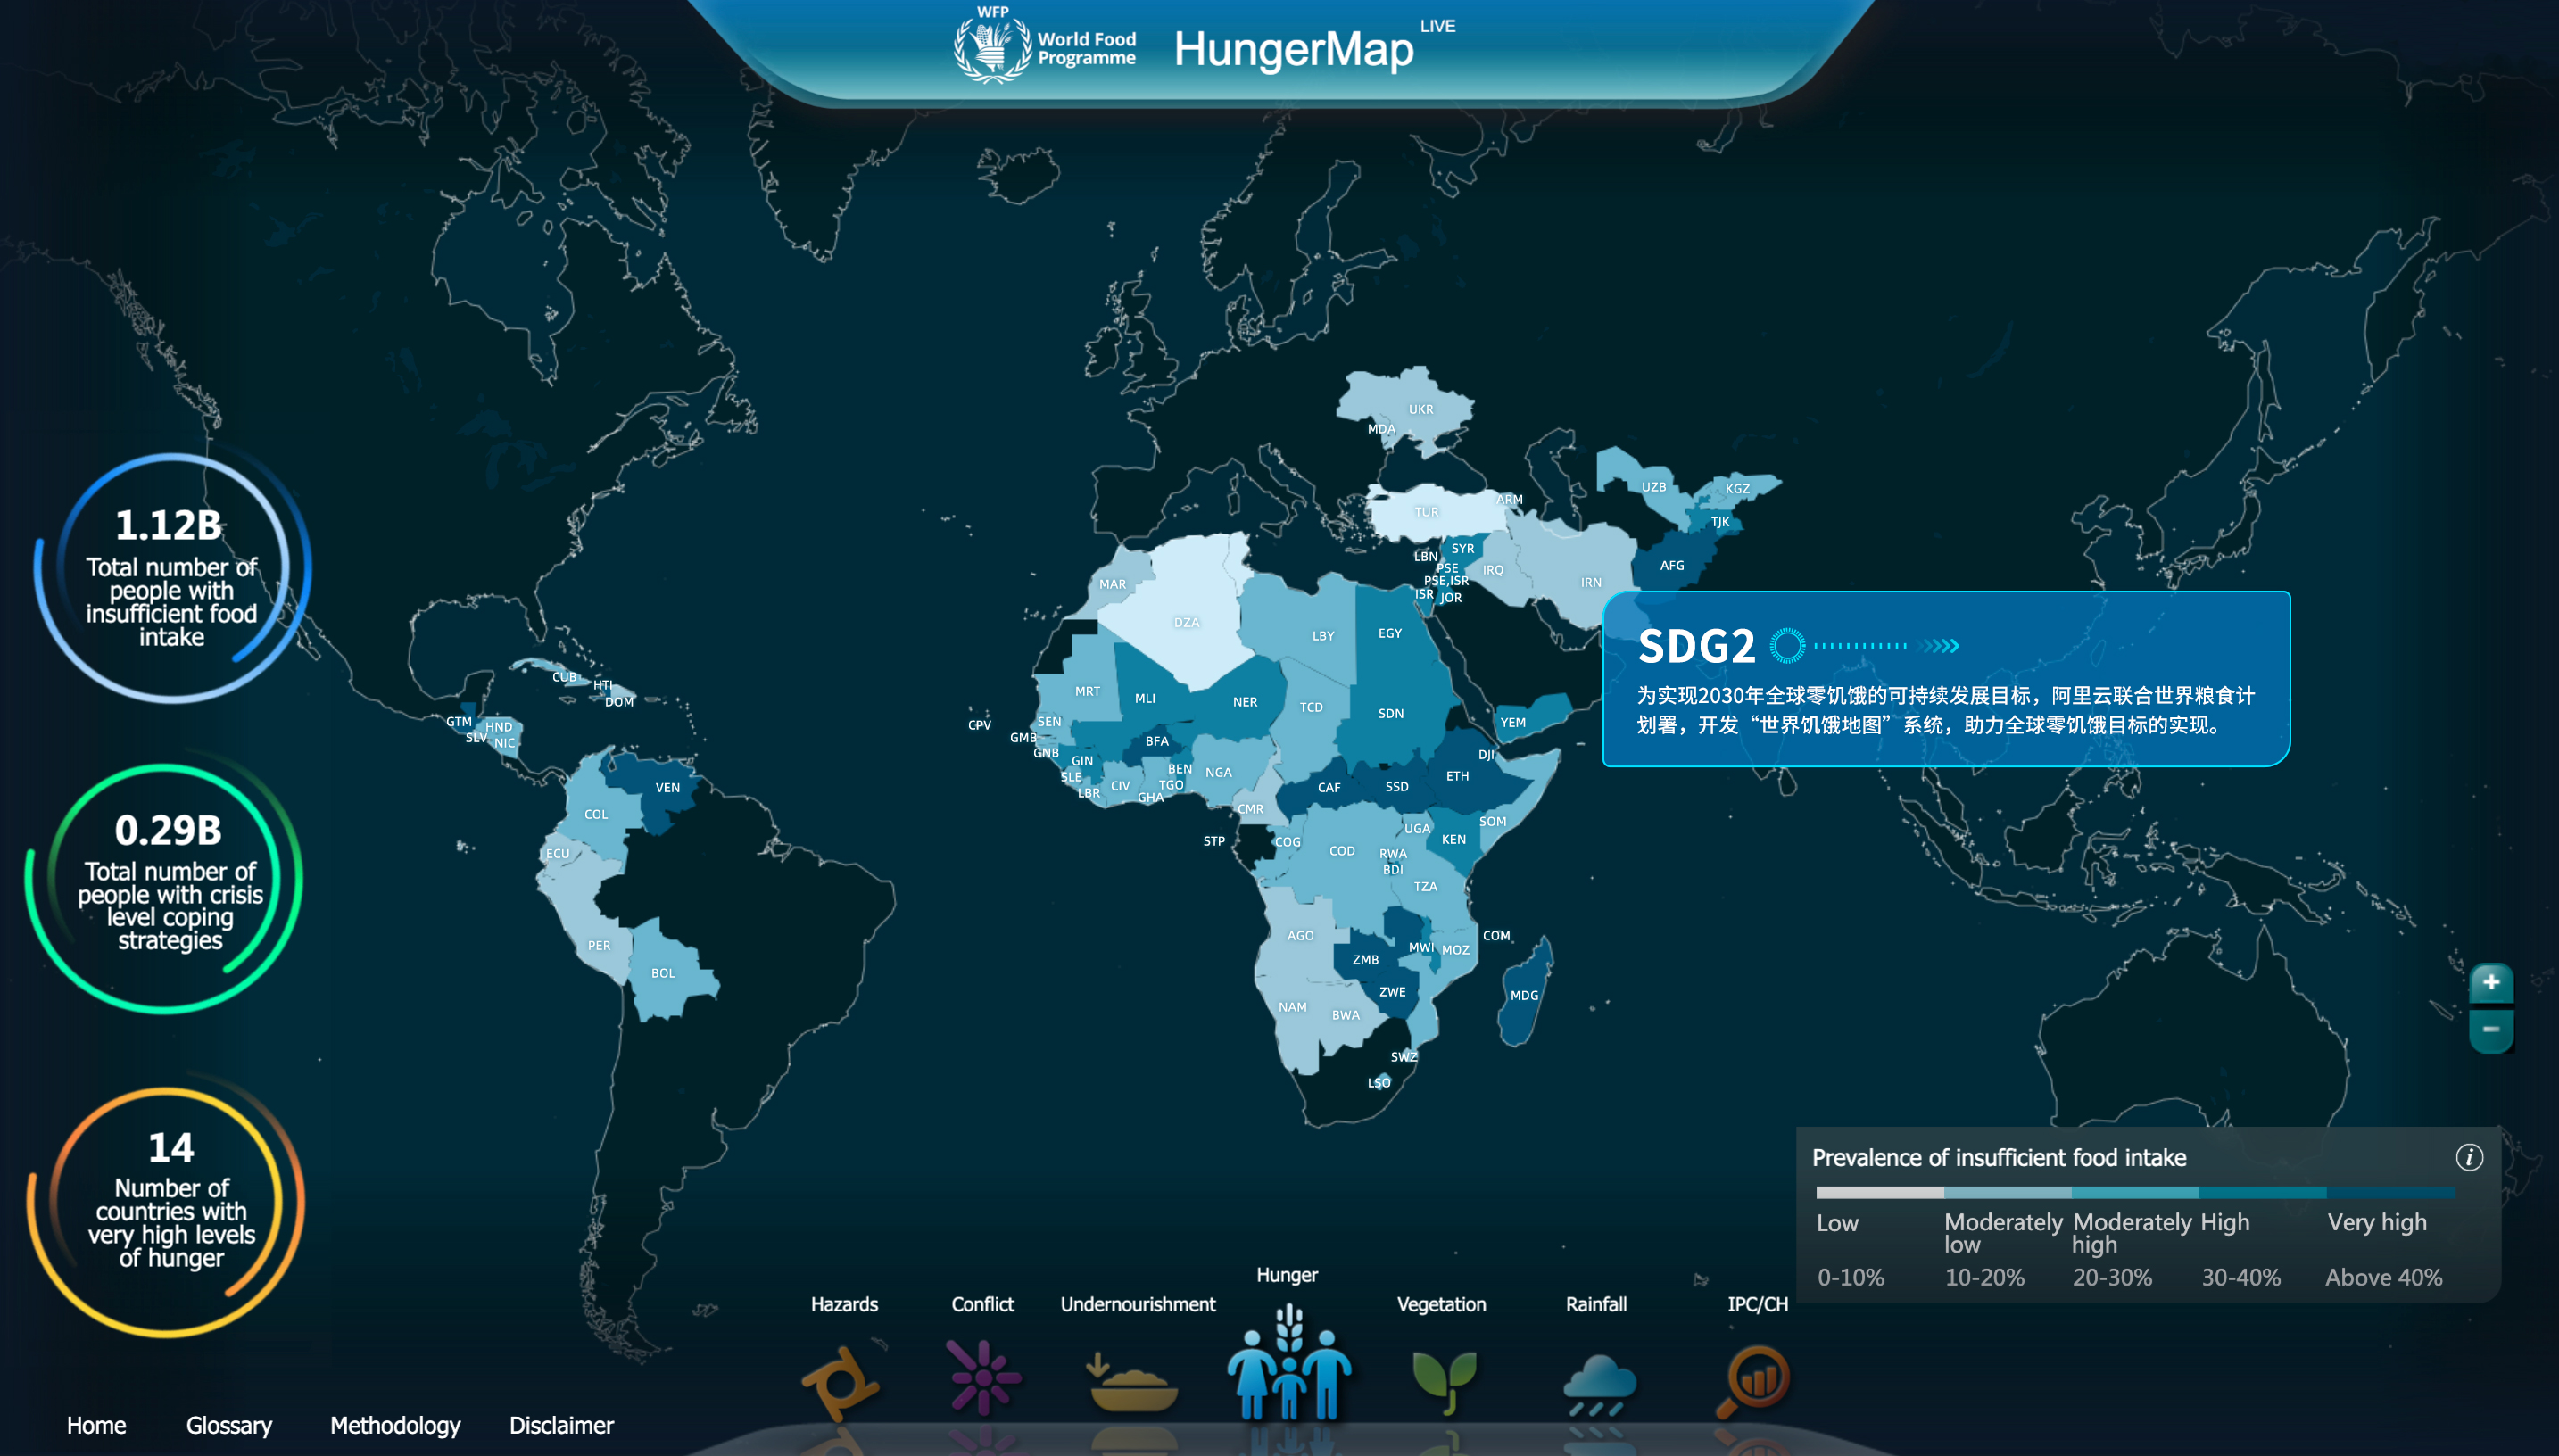 hunger map wfp alibaba cloud 092519